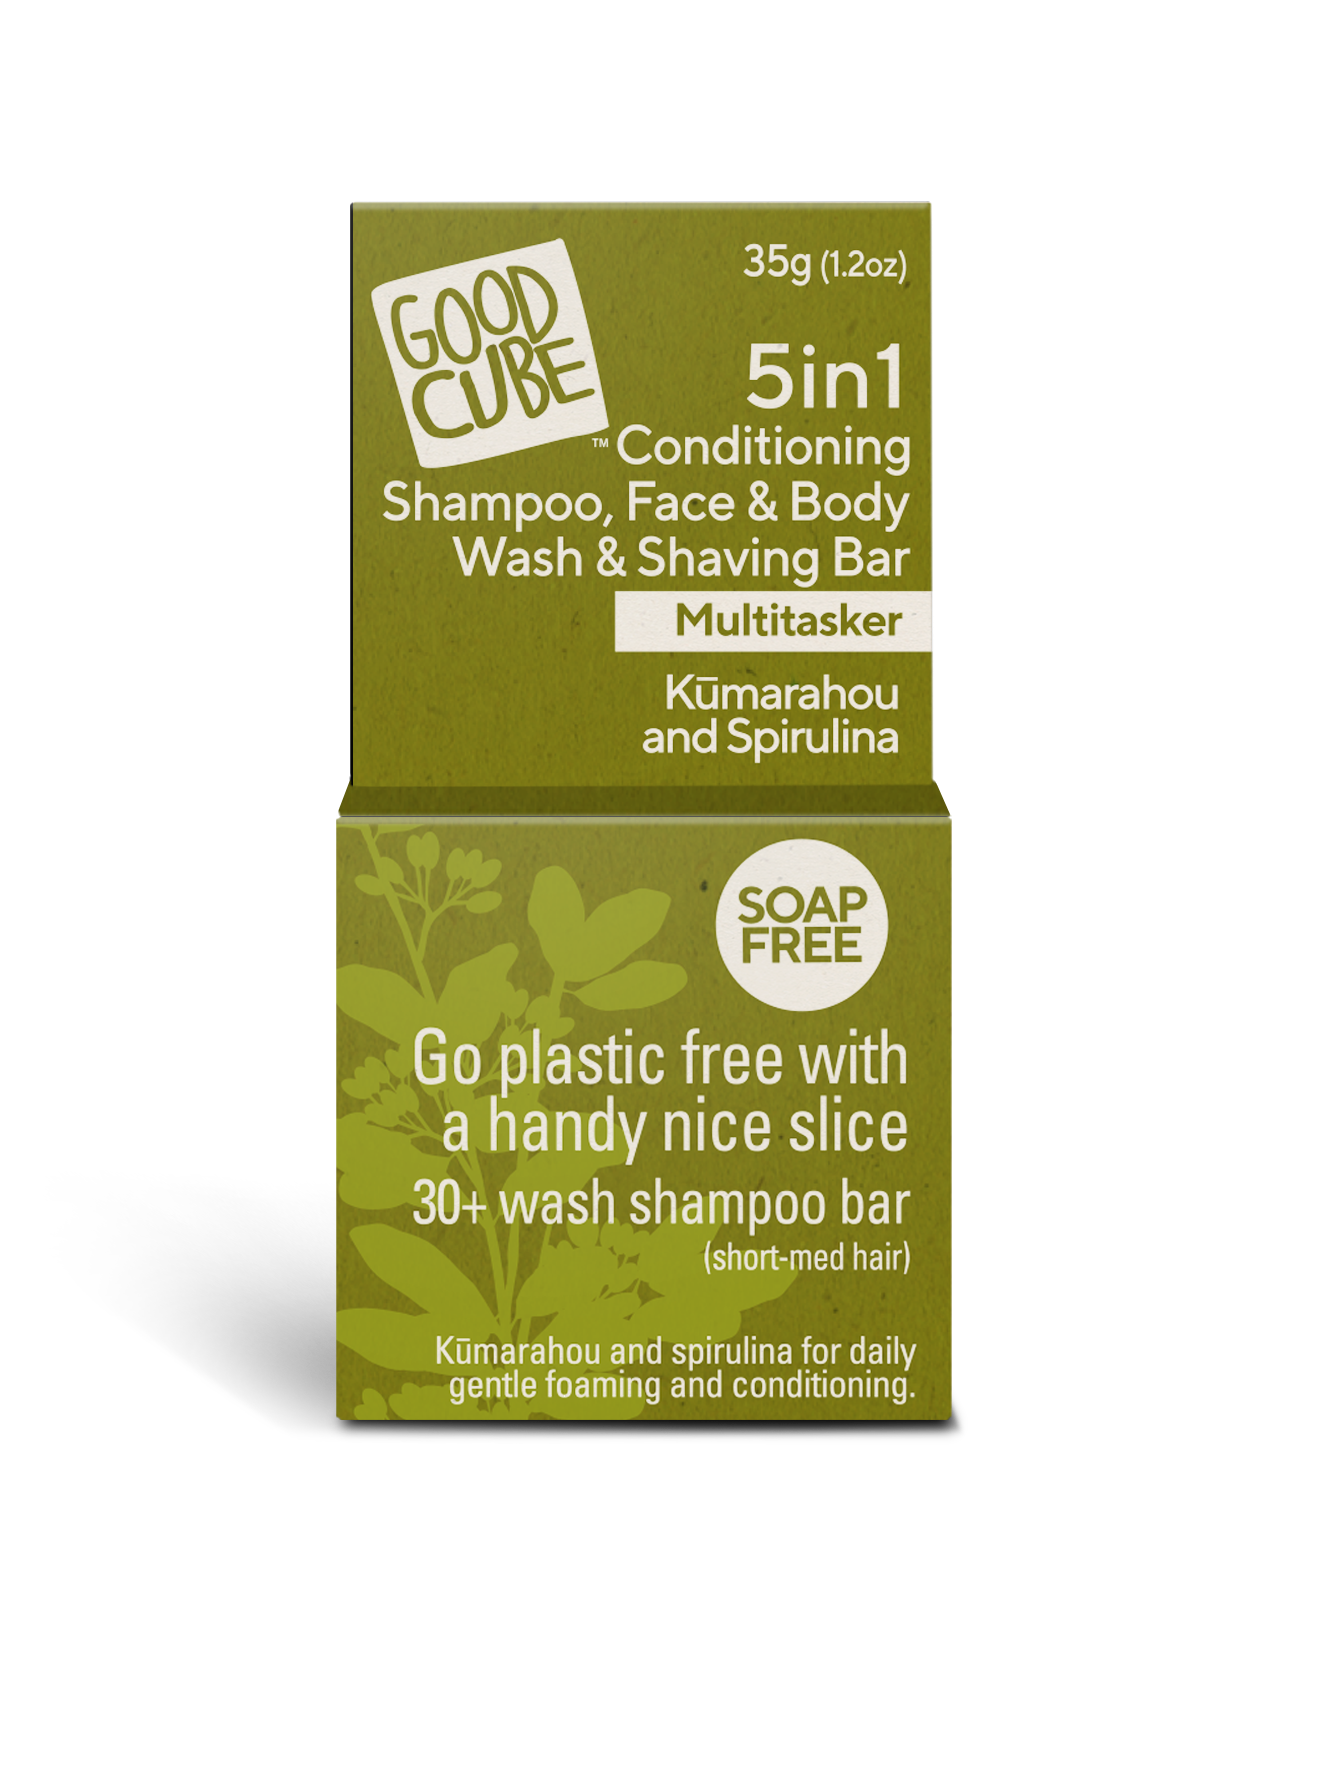 GOOD CUBE 5 in 1 Conditioning Shampoo - Multitasker 35g